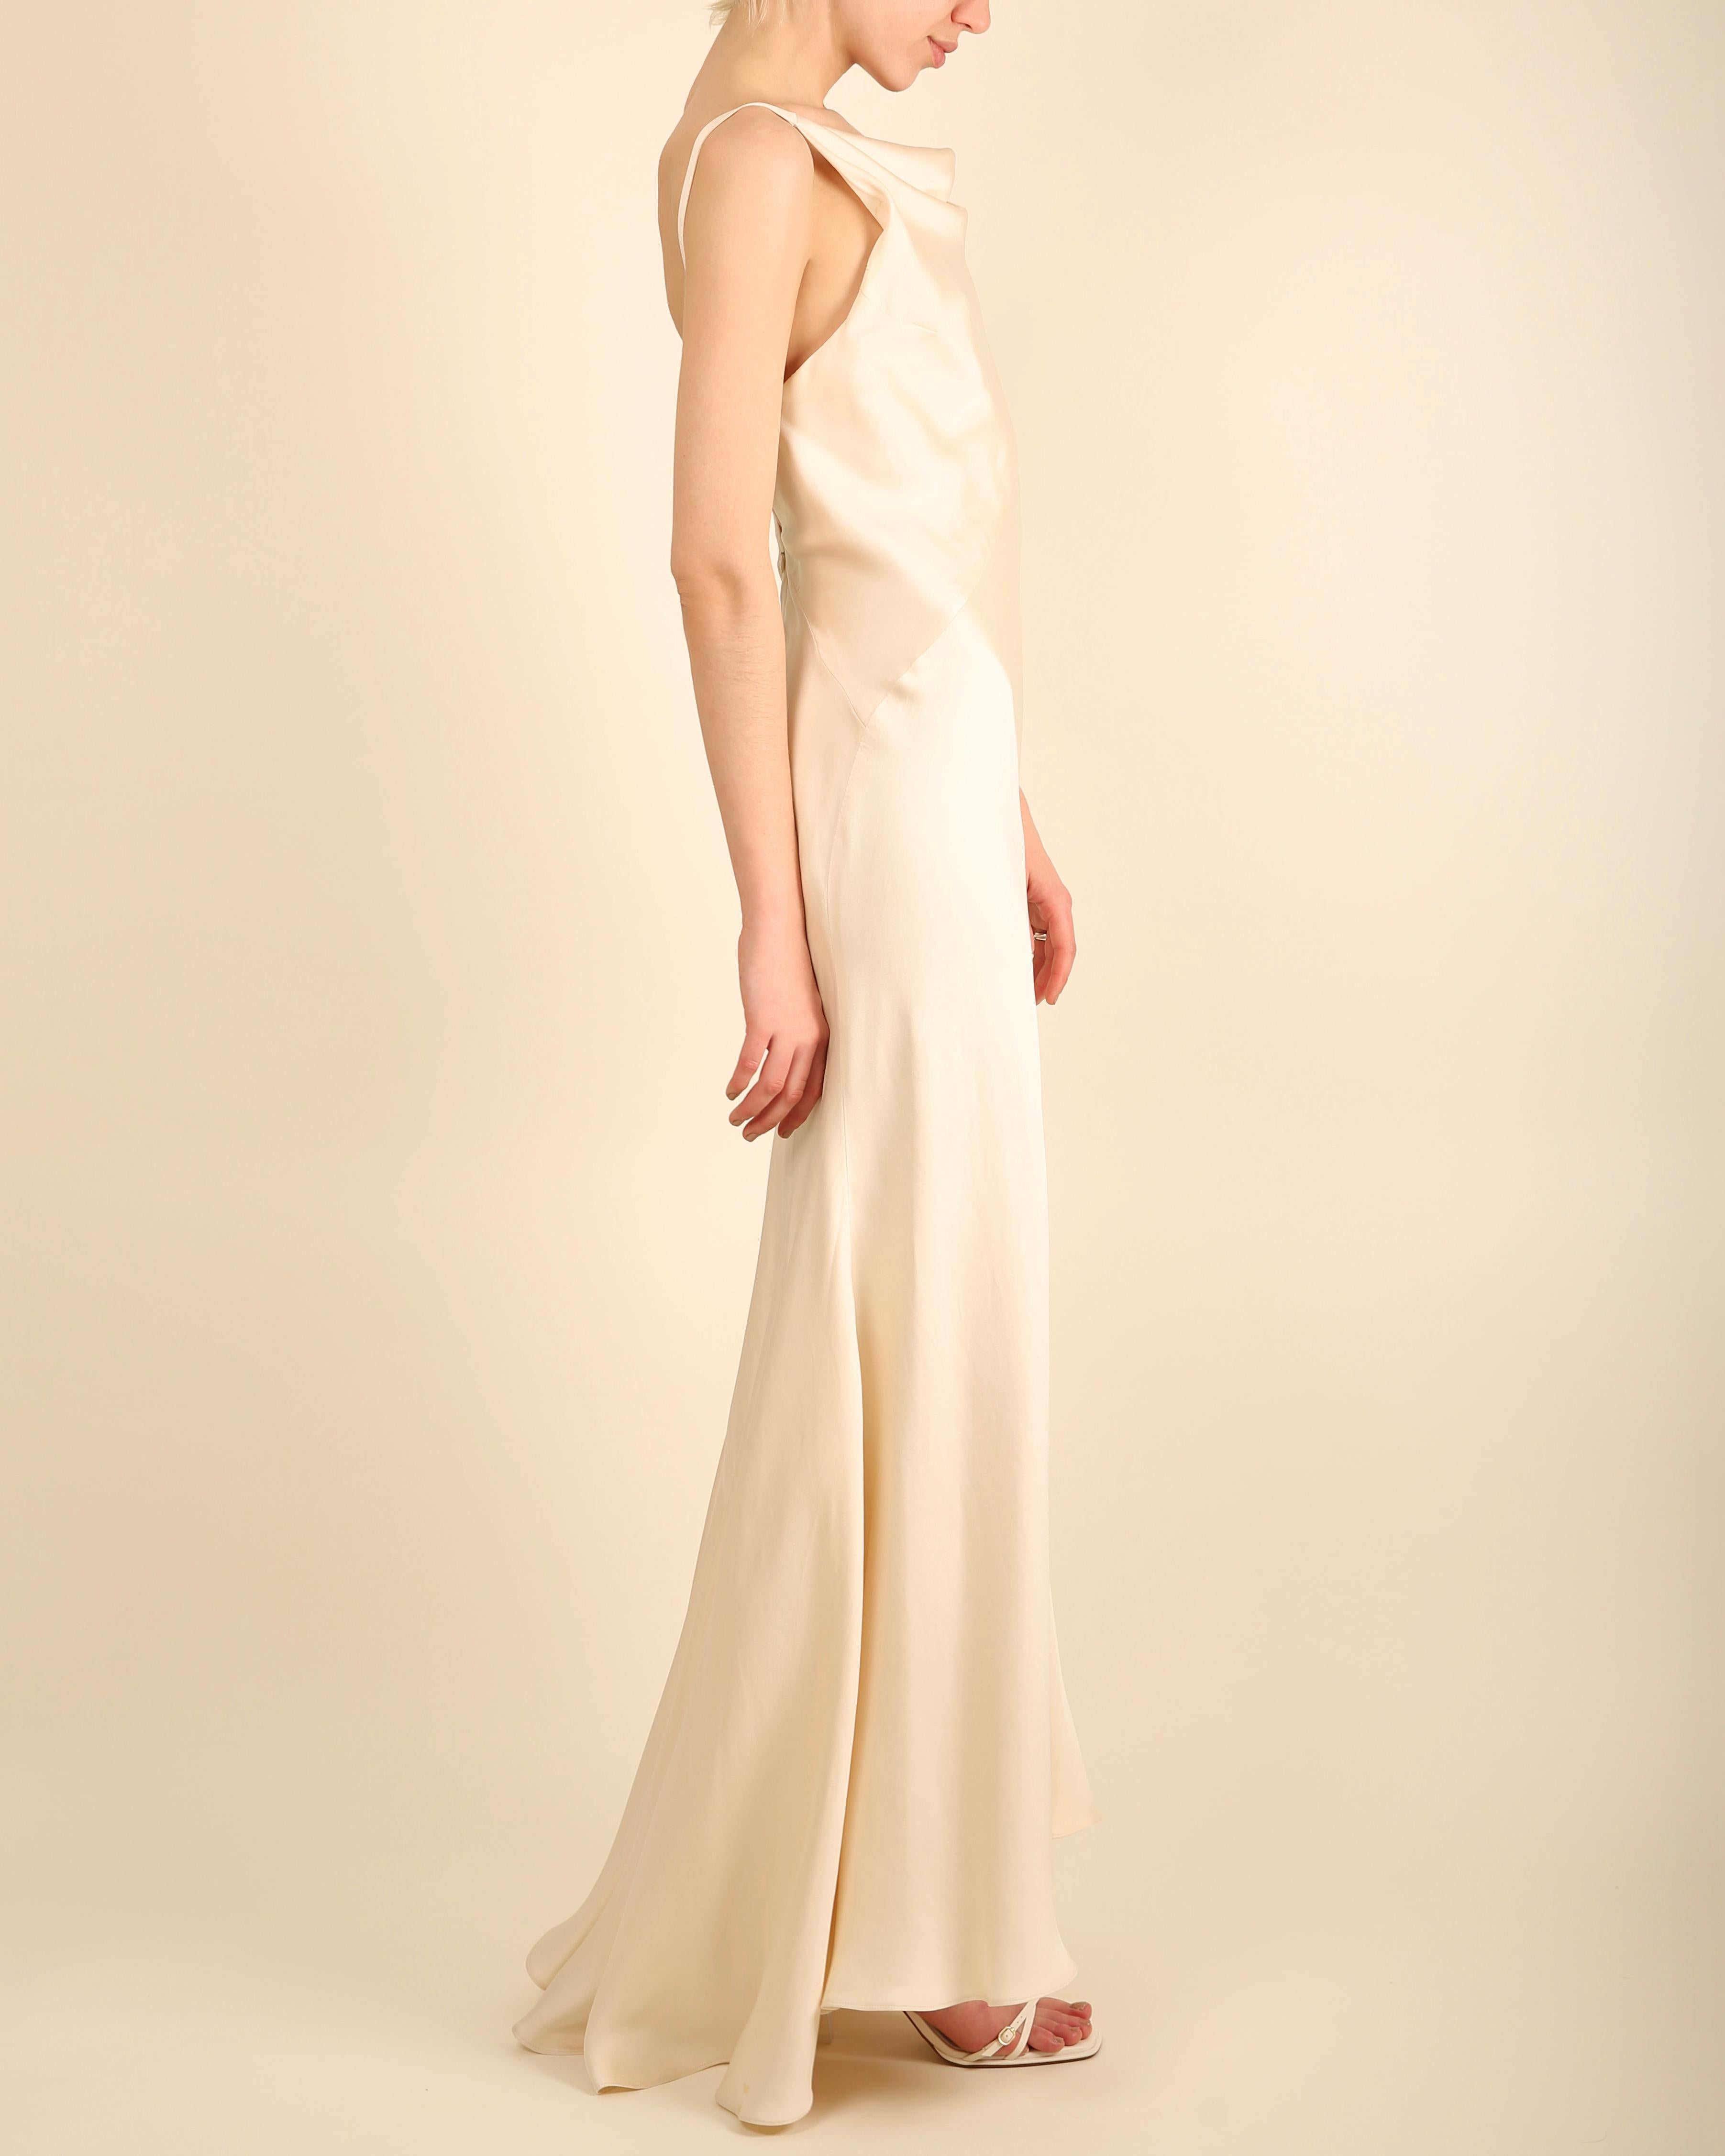 Ralph Lauren champagne bias cut backless silk slip style backless gown dress In Fair Condition For Sale In Paris, FR